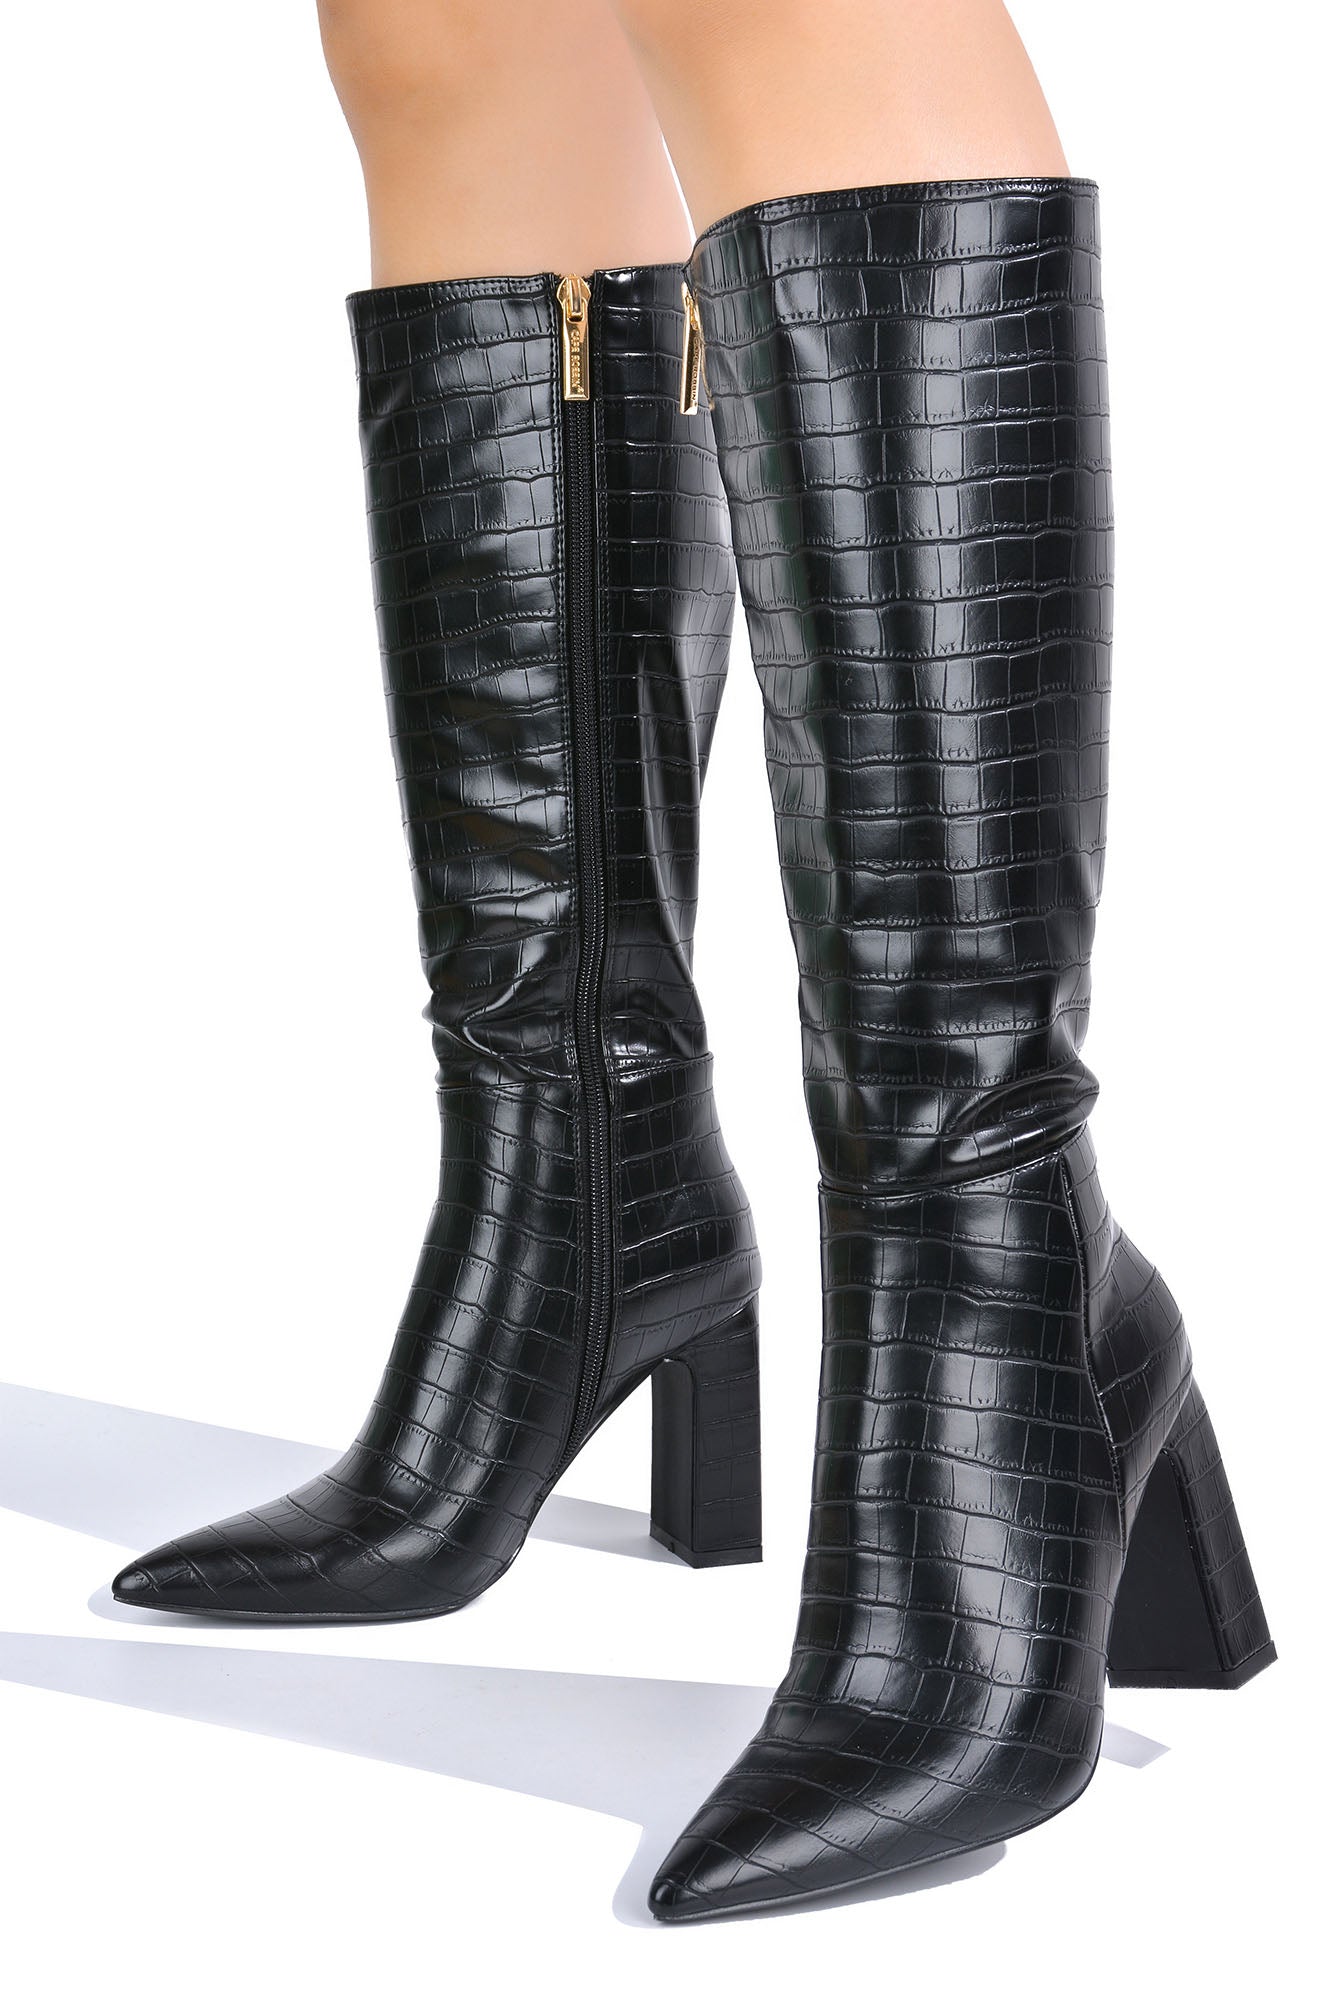 Cape Robbin - SAYWHAT-2 - BLACK - BOOTS